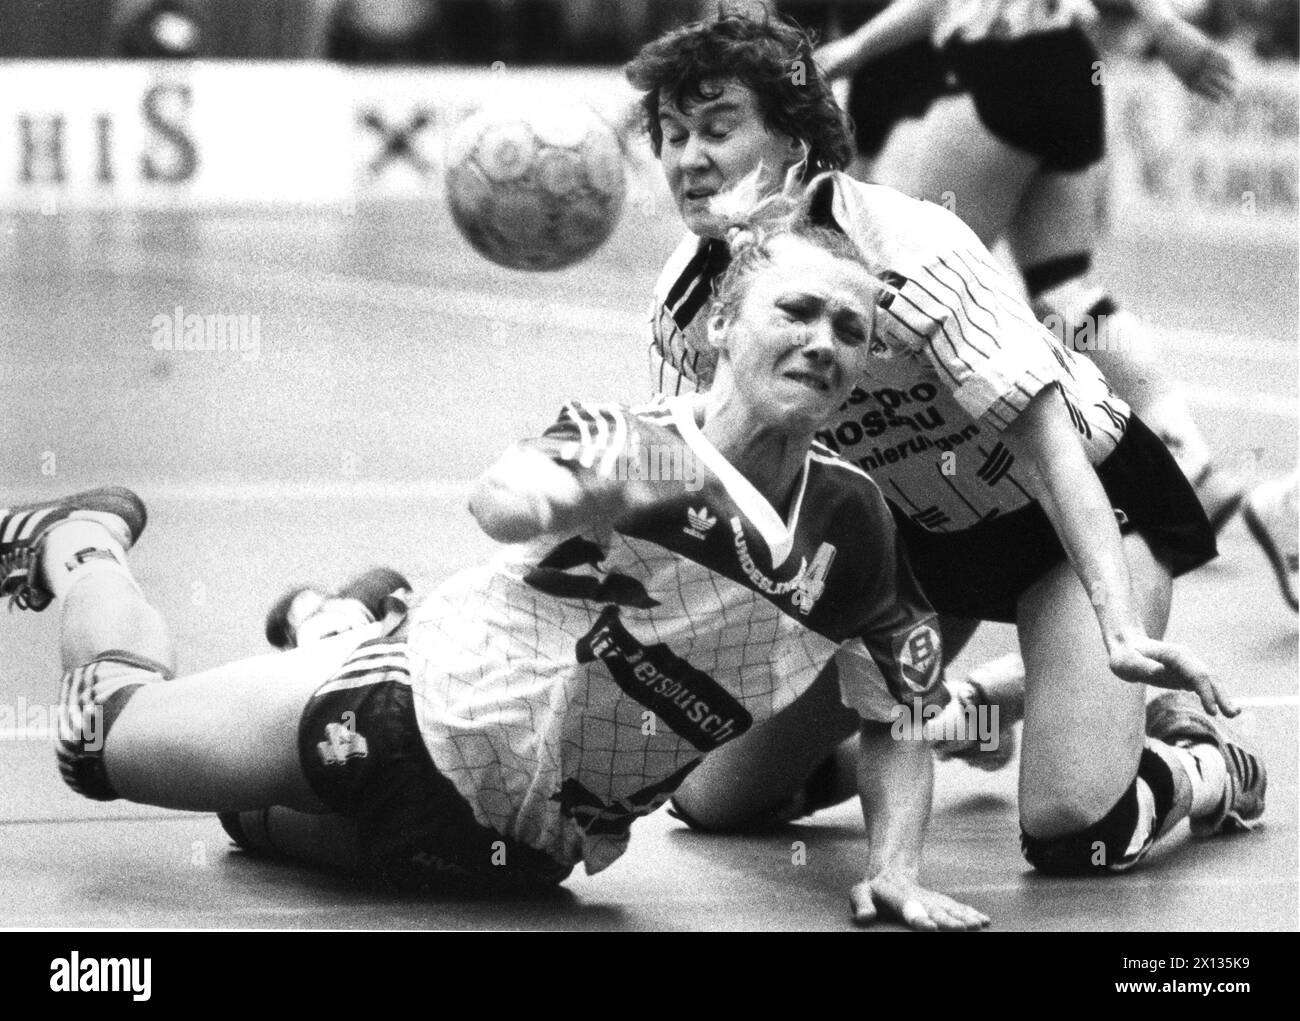 Match between BV Hypobank Suedstadt and LC Bruehl-St. Gallen in the context of the Handball Europe Cup in Vienna on April 22nd 1990. In the picture: Jadranka (Hypobank, front) and Vroni Keller. - 19900422 PD0003 - Rechteinfo: Rights Managed (RM) Stock Photo